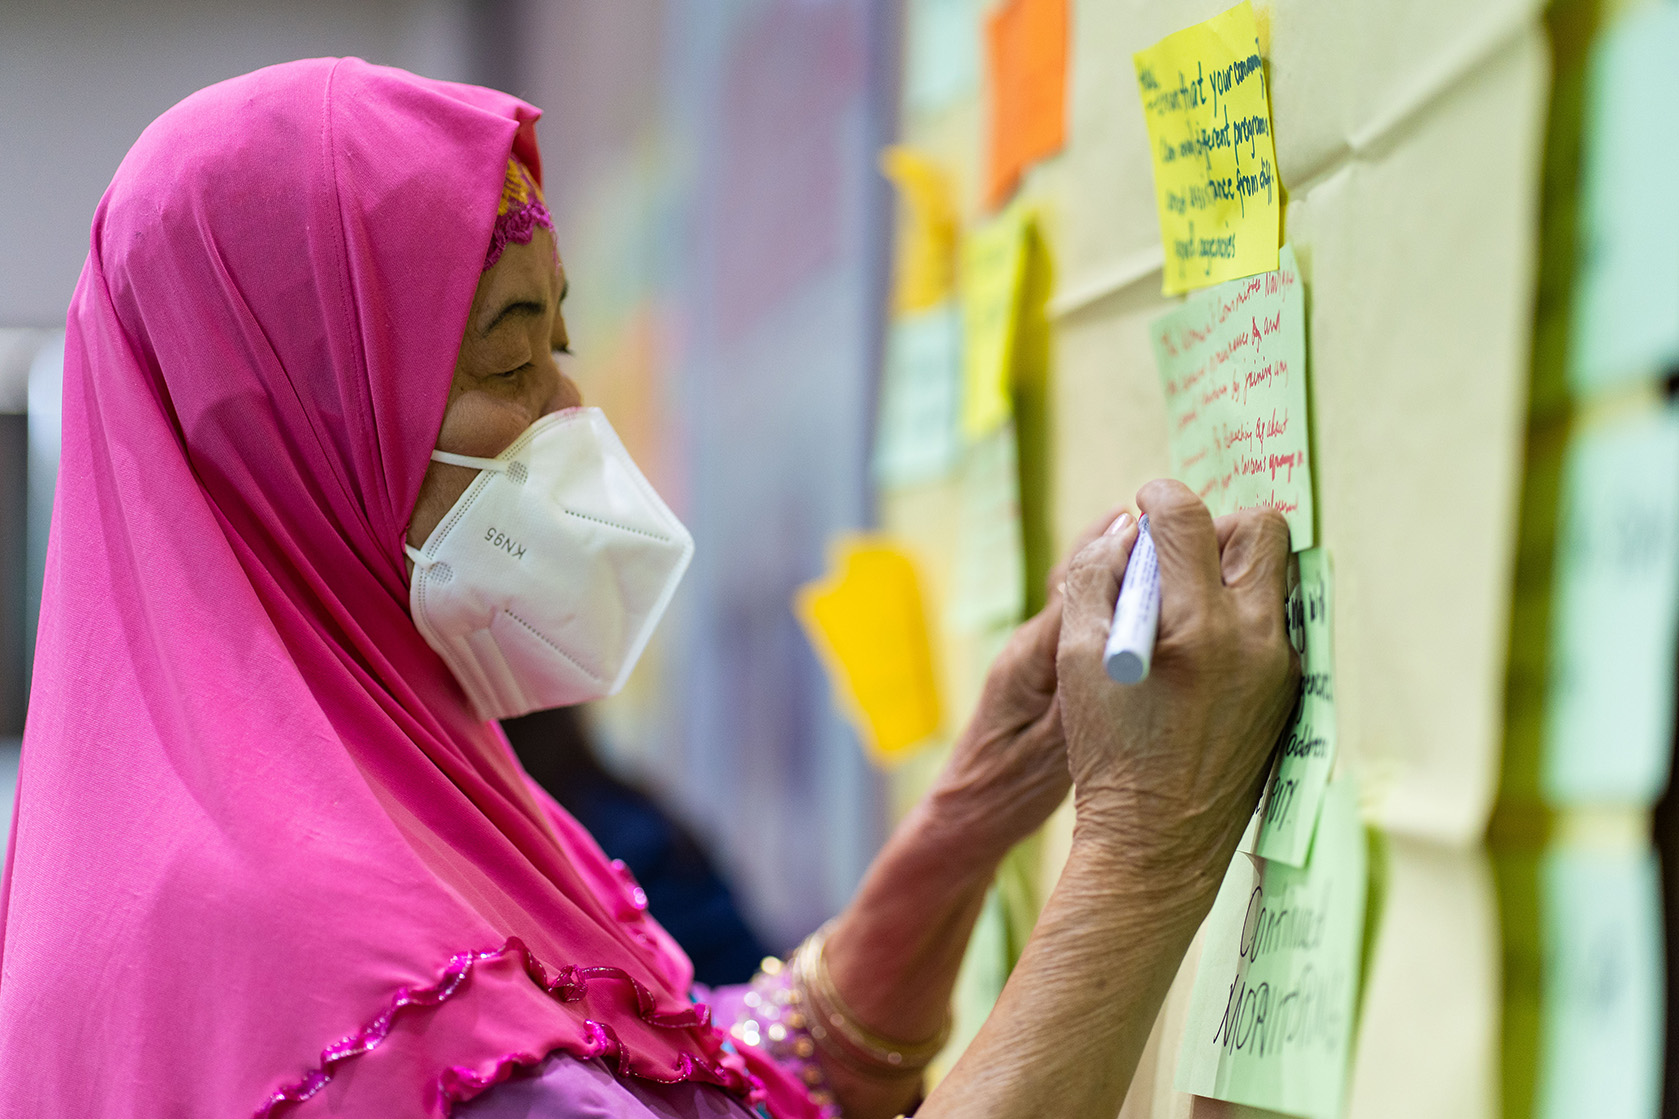 Diana Musa, a senior leader of the women’s committee of the MNLF, a former insurgent group, expresses her thoughts at a UN Women training to strengthen leadership and the committee’s values and goals. This photo was taken in General Santos City, the Philippines, on 27 October 2021.